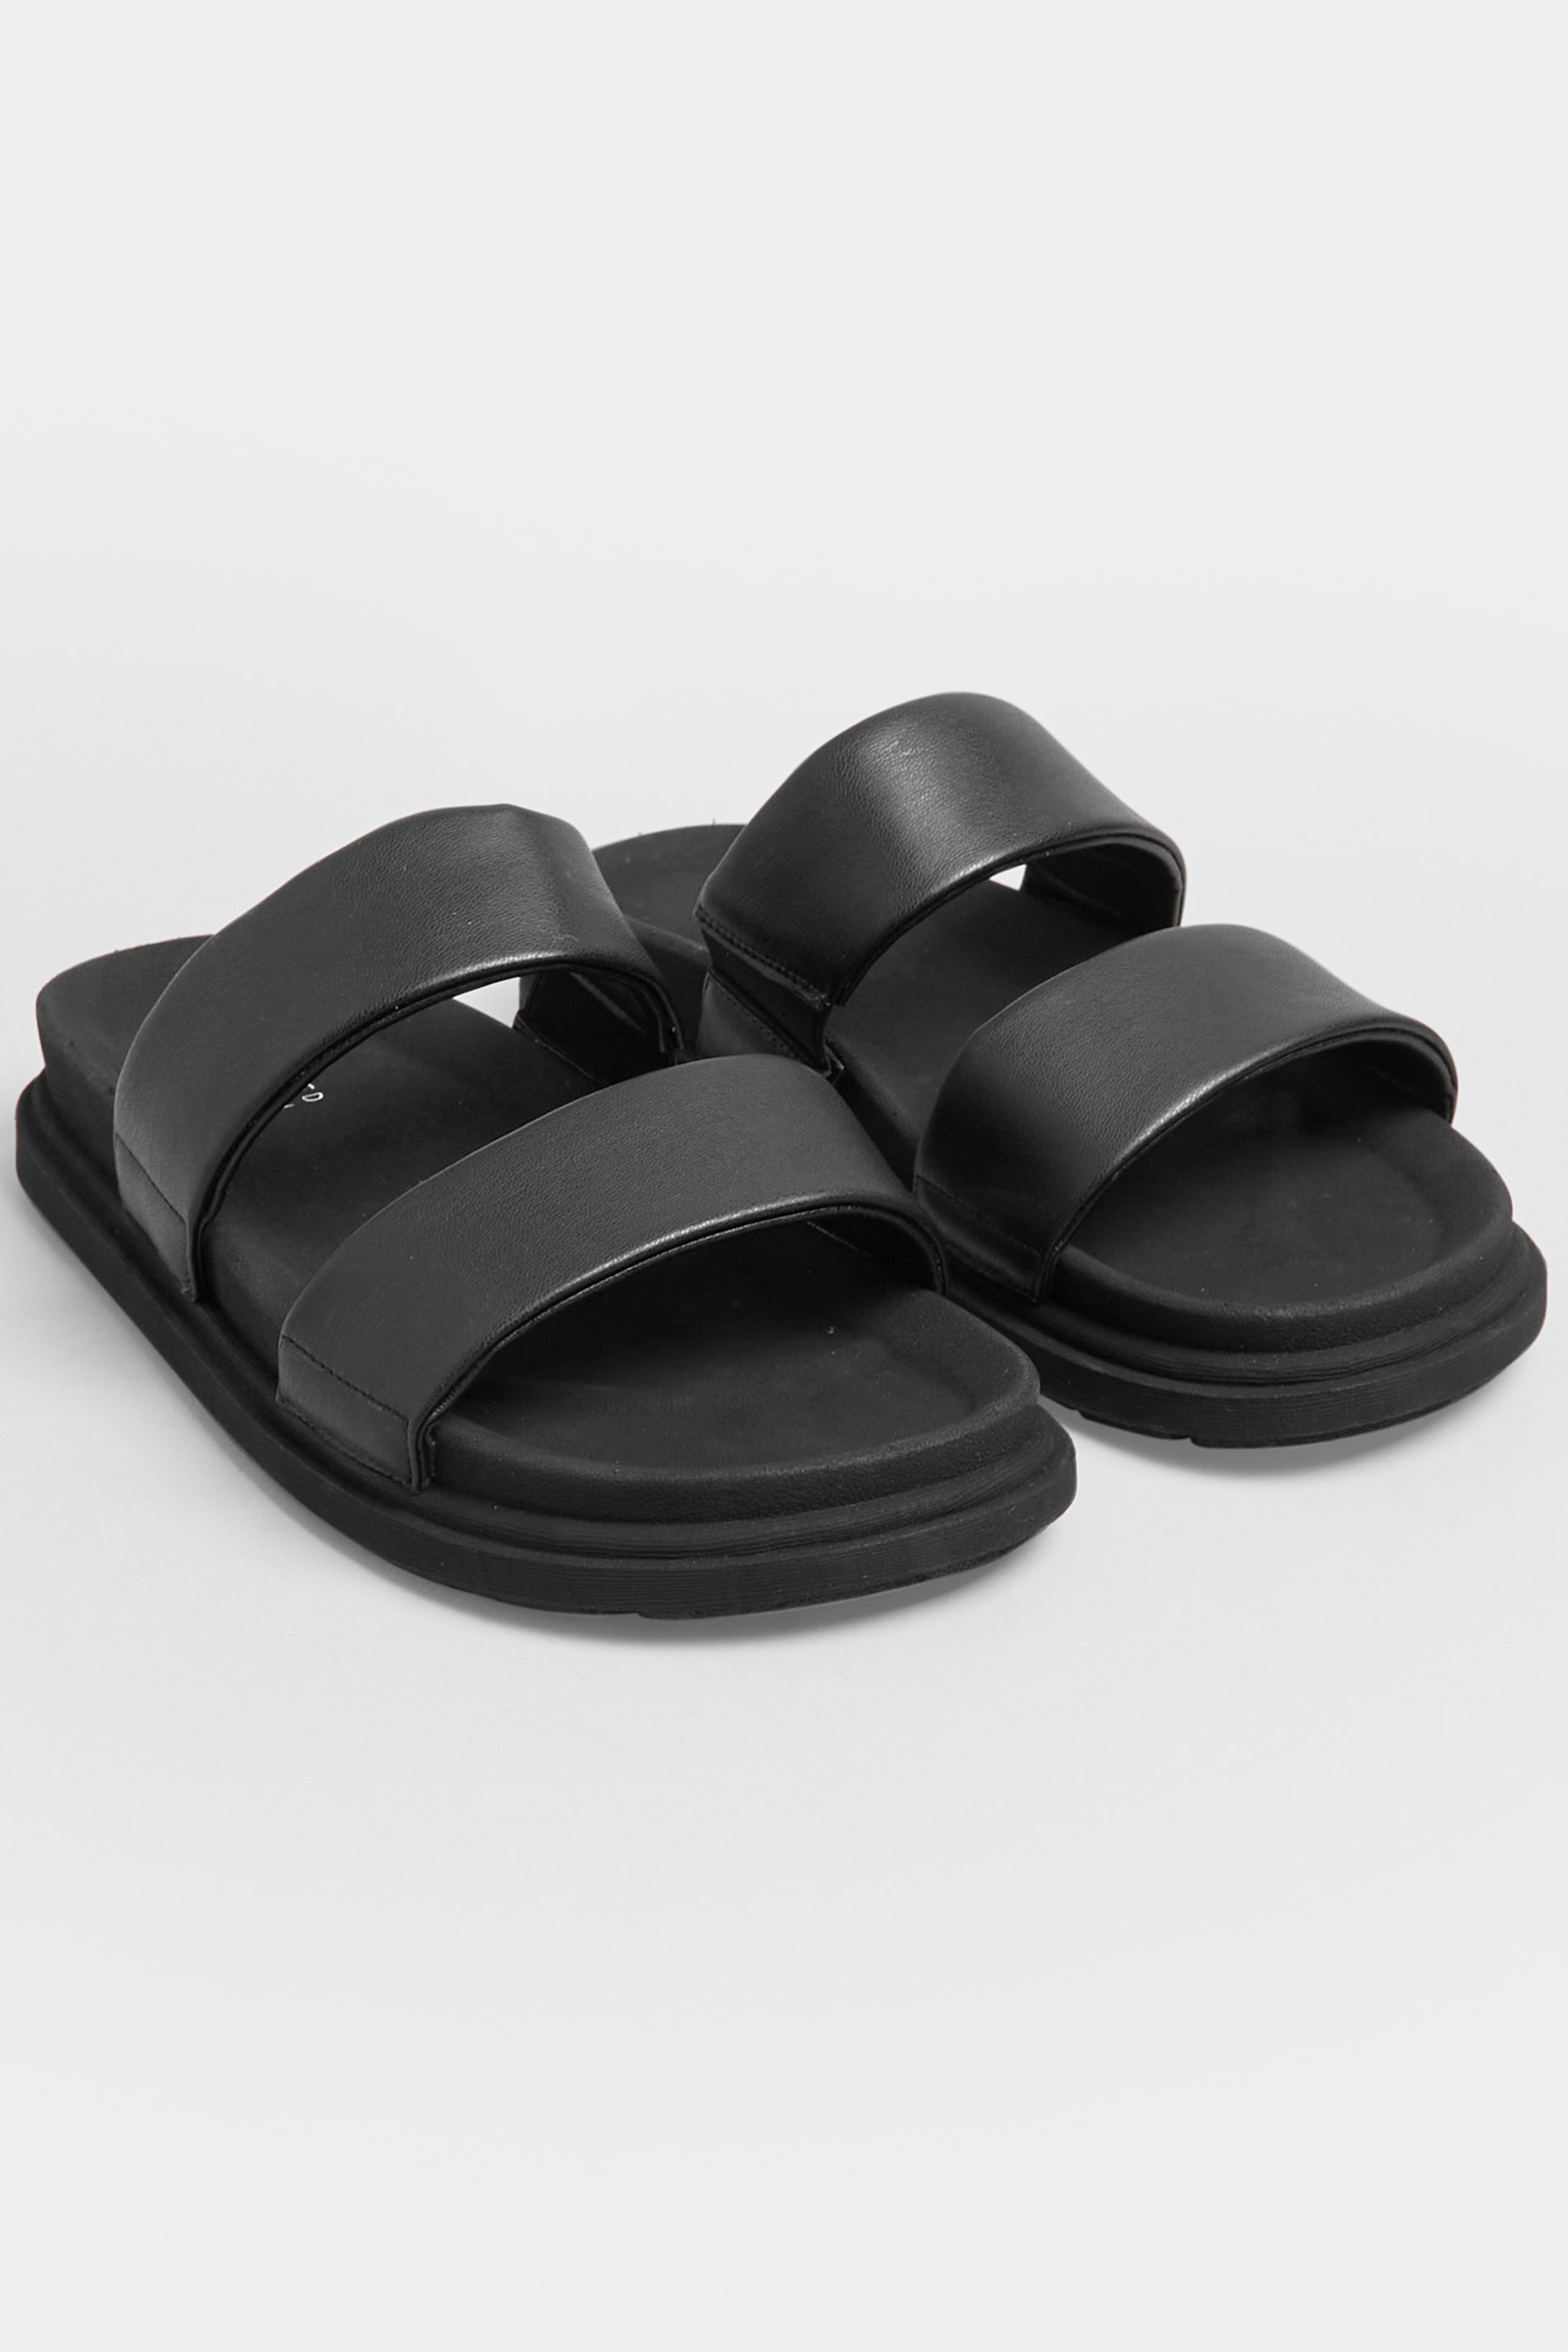 LIMITED COLLECTION Black Two Strap Sandals In Extra Wide EEE Fit | Yours Clothing 1